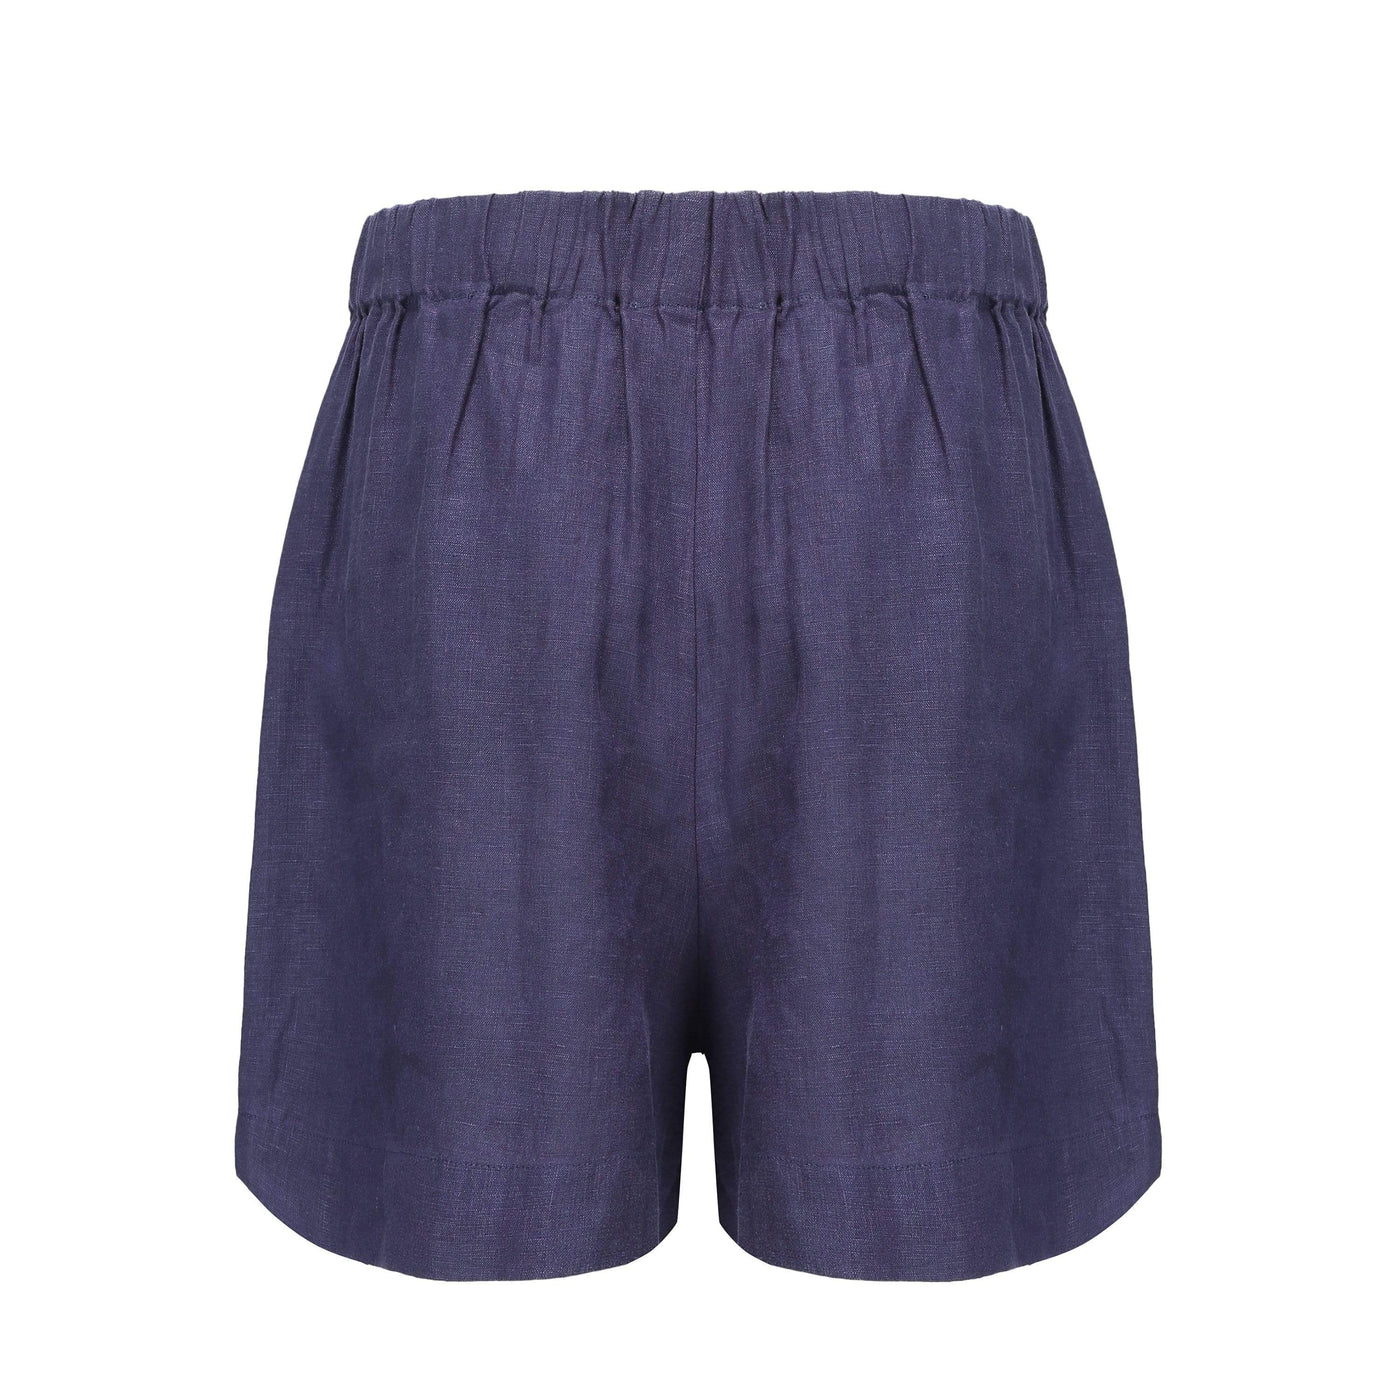 Lilly Pilly Collection 100% organic linen shorts in Denim Blue, as a 3D image showing back view